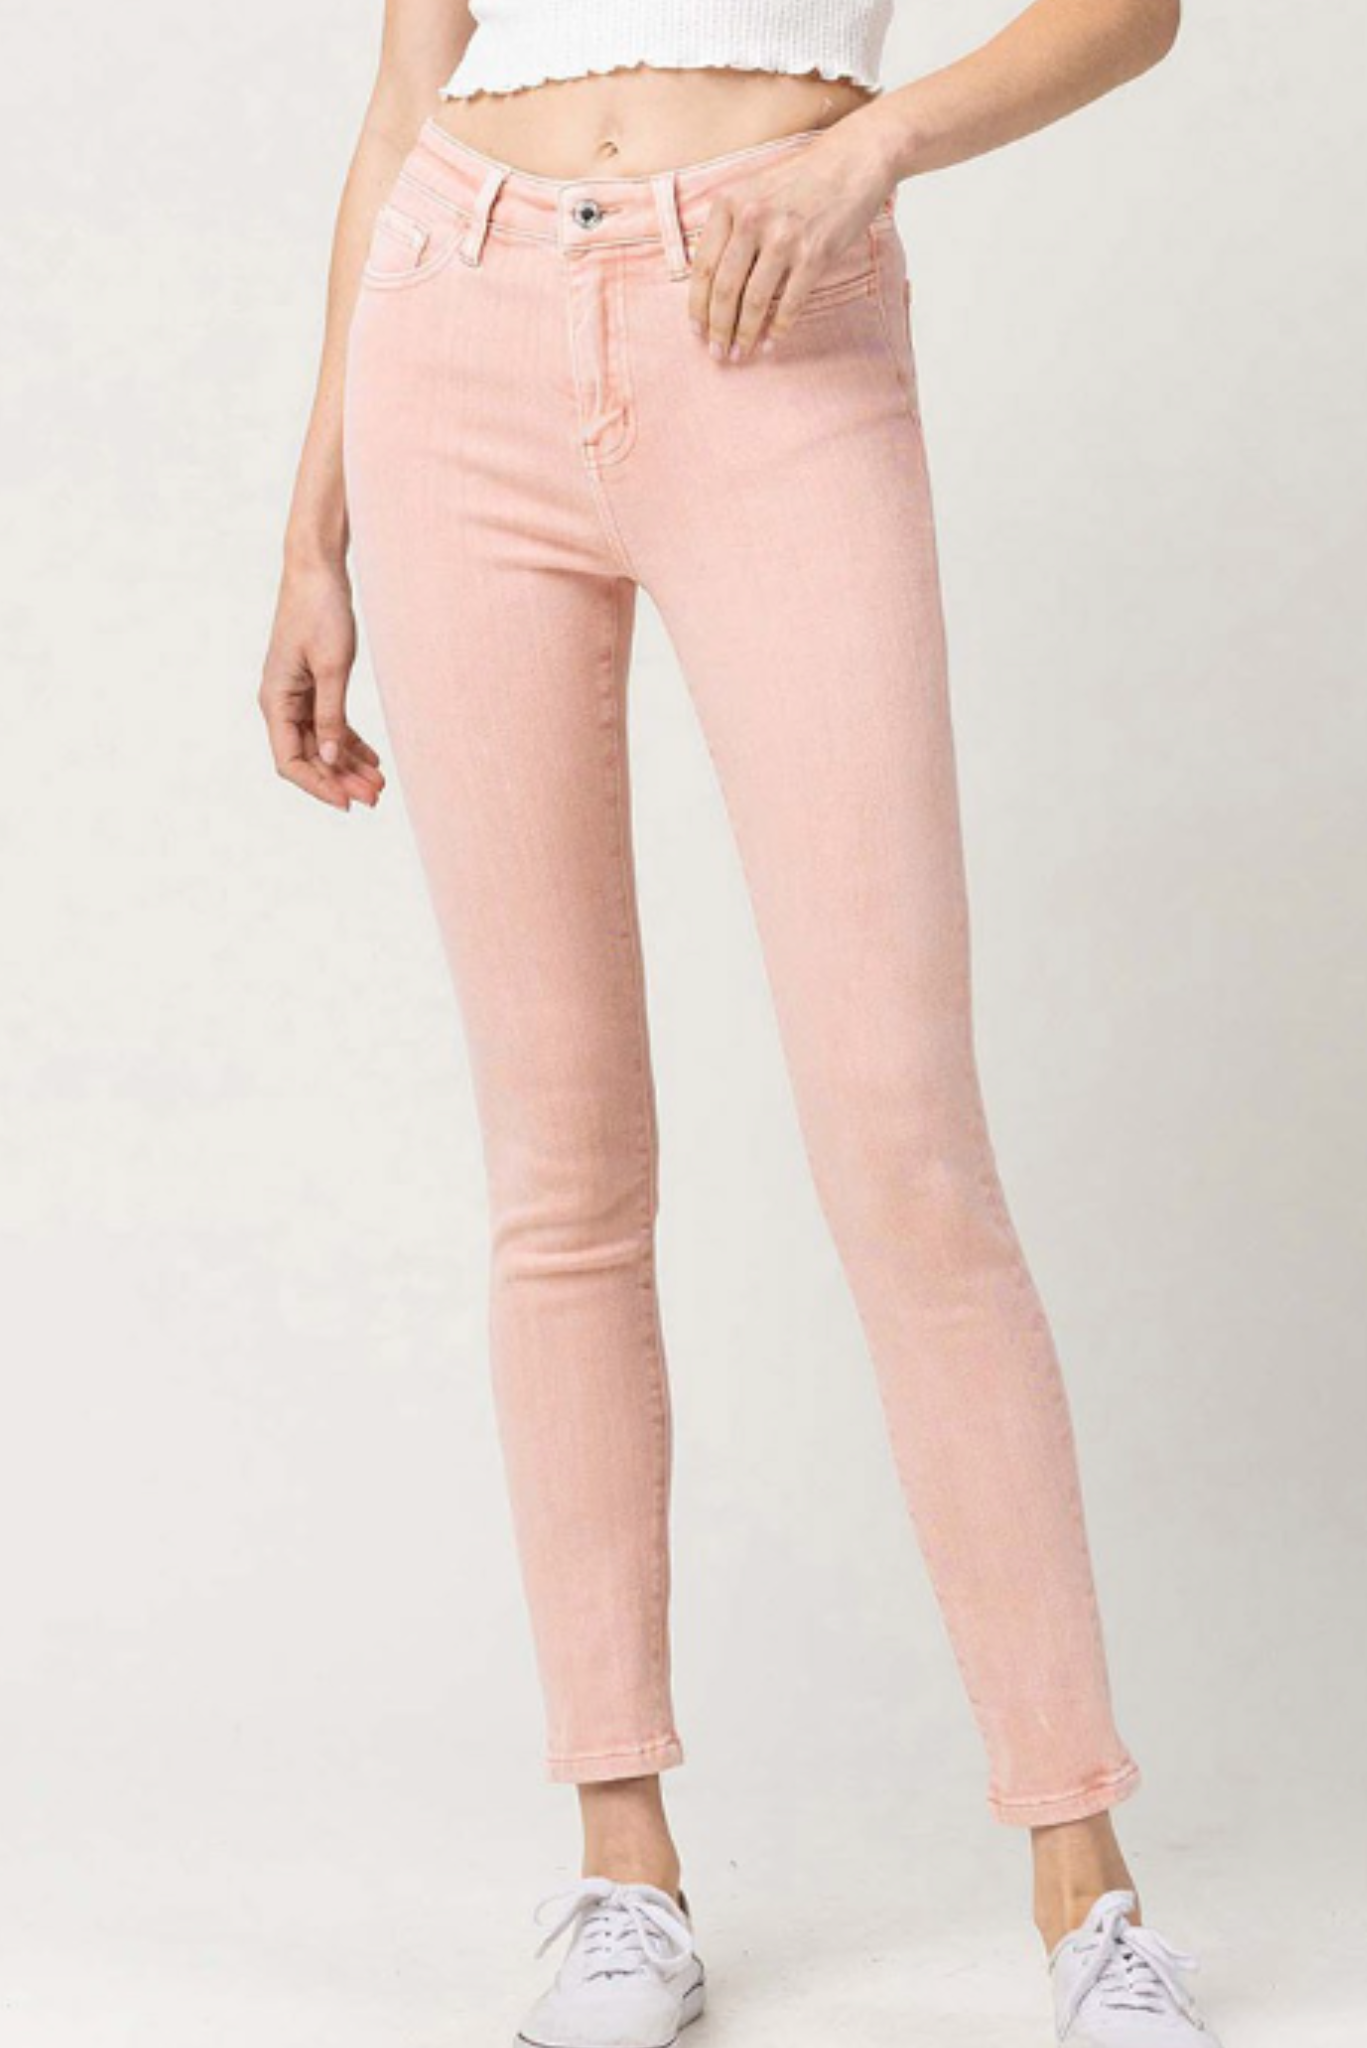 Vervet Peach Washed High Rise Skinny Jeans, skinny jeans, colored denim, high rise jeans, peach jeans, shop style your senses by mallory fitzsimmons